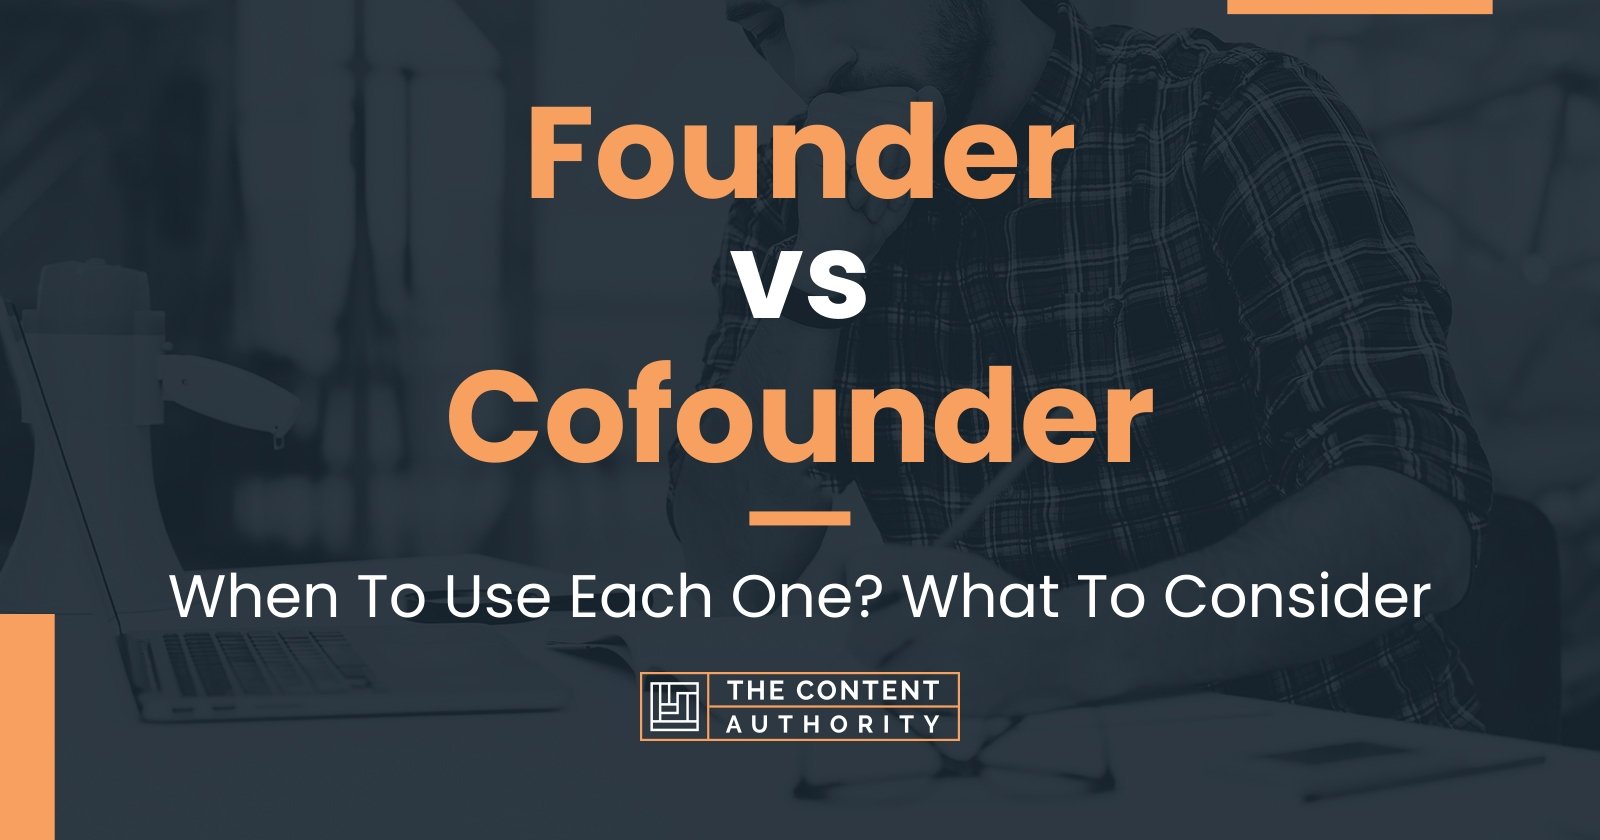 Founder vs Cofounder: When To Use Each One? What To Consider